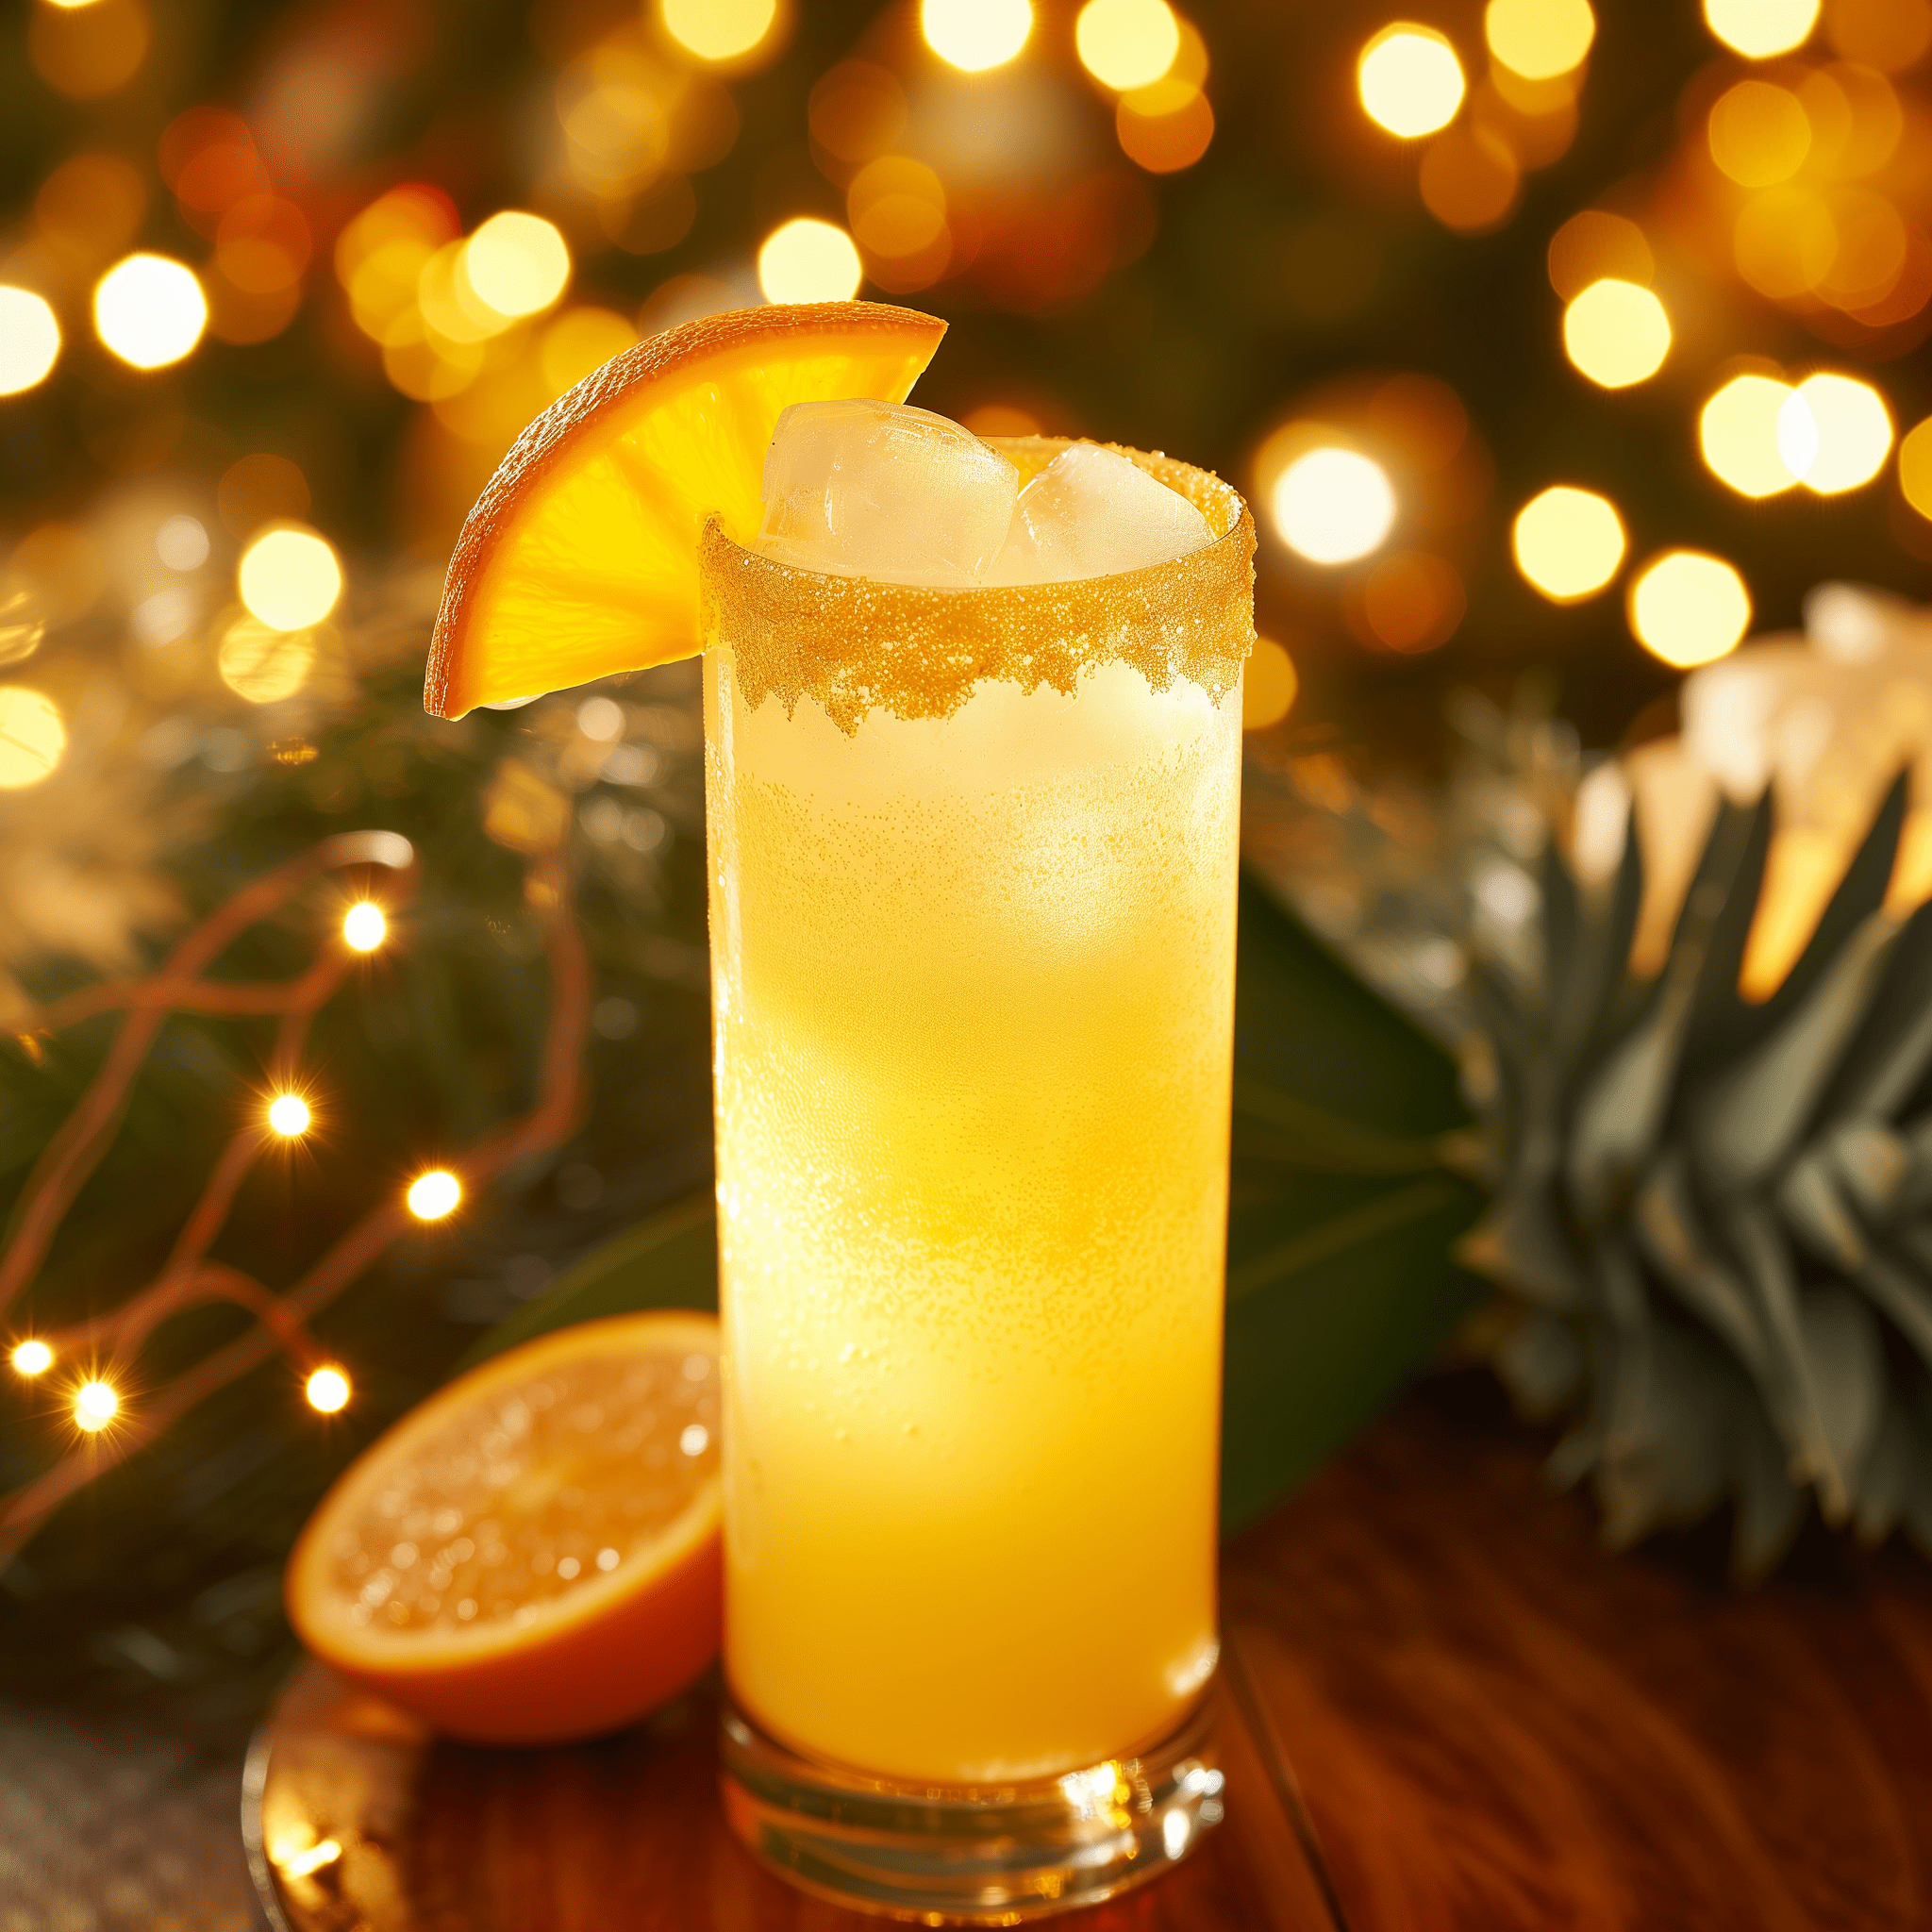 Cinderella Mocktail Recipe - The Cinderella Mocktail is a delightful blend of sweet and citrus flavors with a slight effervescence from the ginger ale. It's a light and refreshing drink with a tropical twist, perfect for sipping on a warm day.